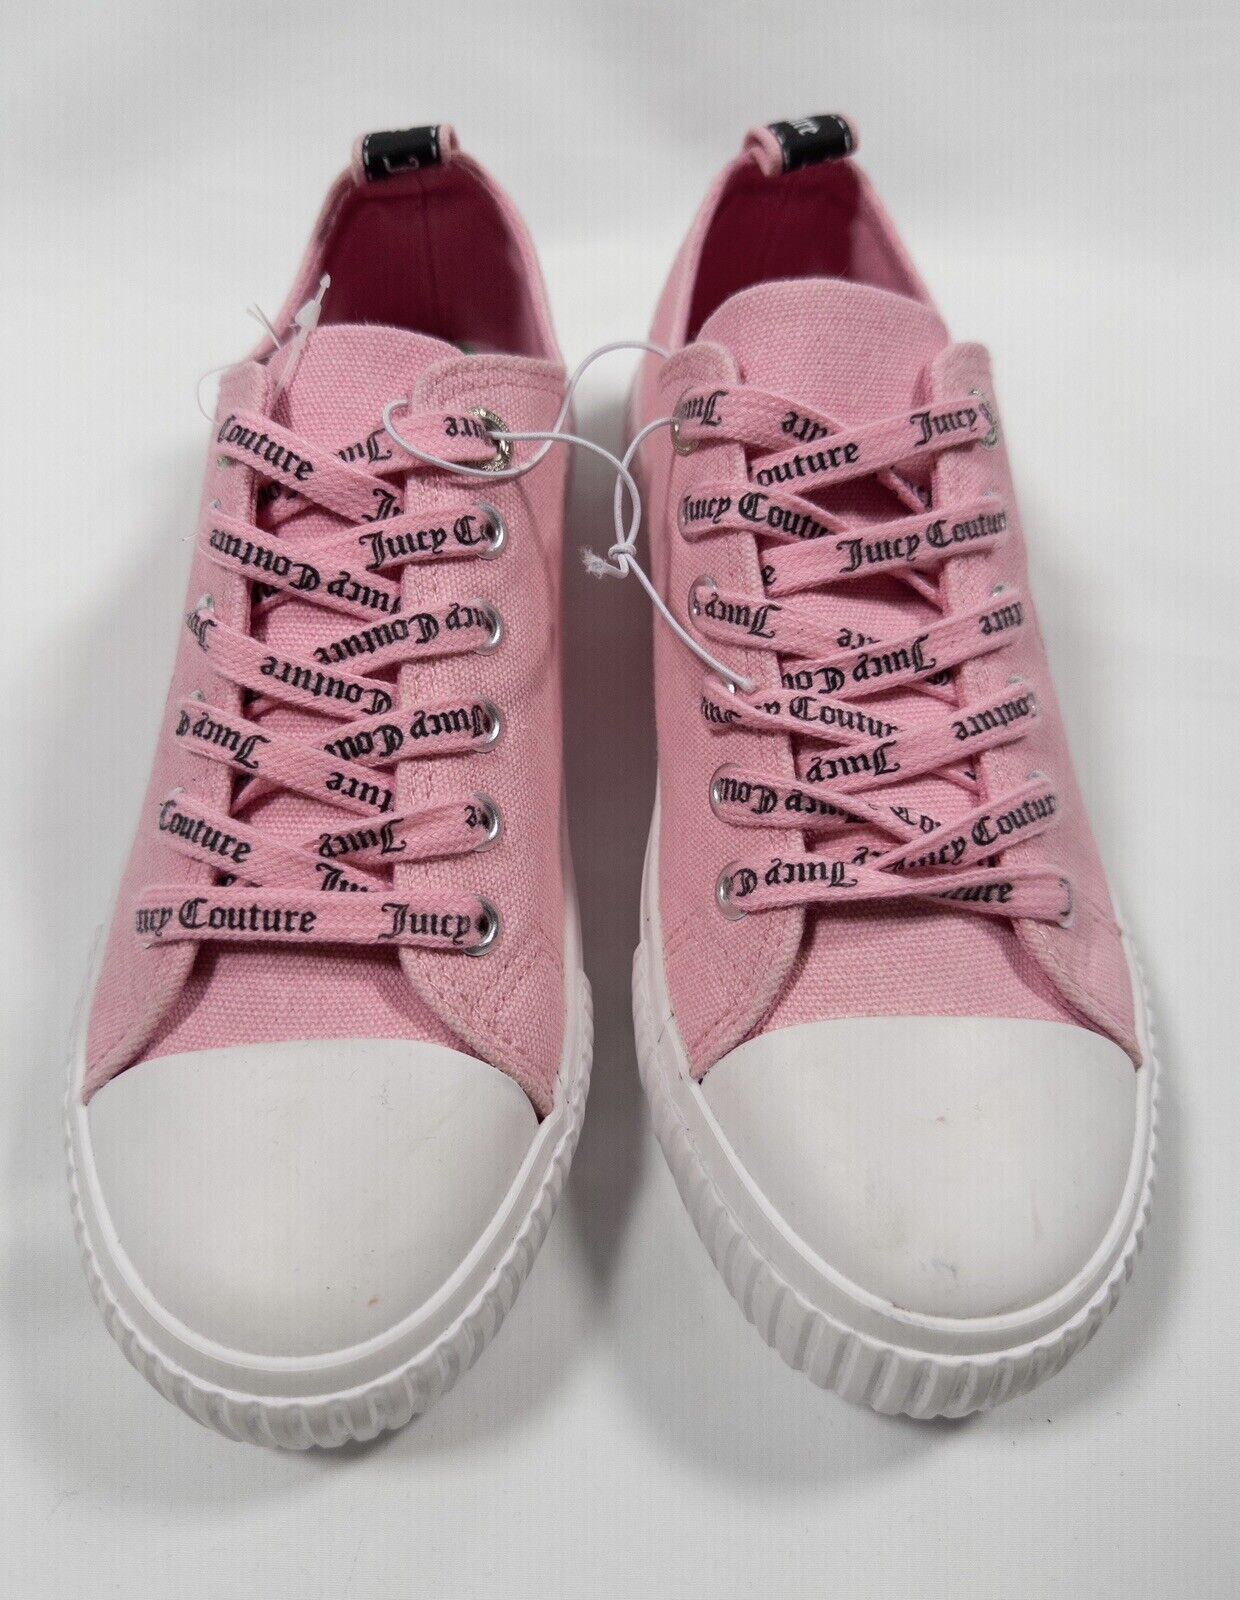 Juicy Couture Women's Canvas Trainers Shoes Pink Size UK 4